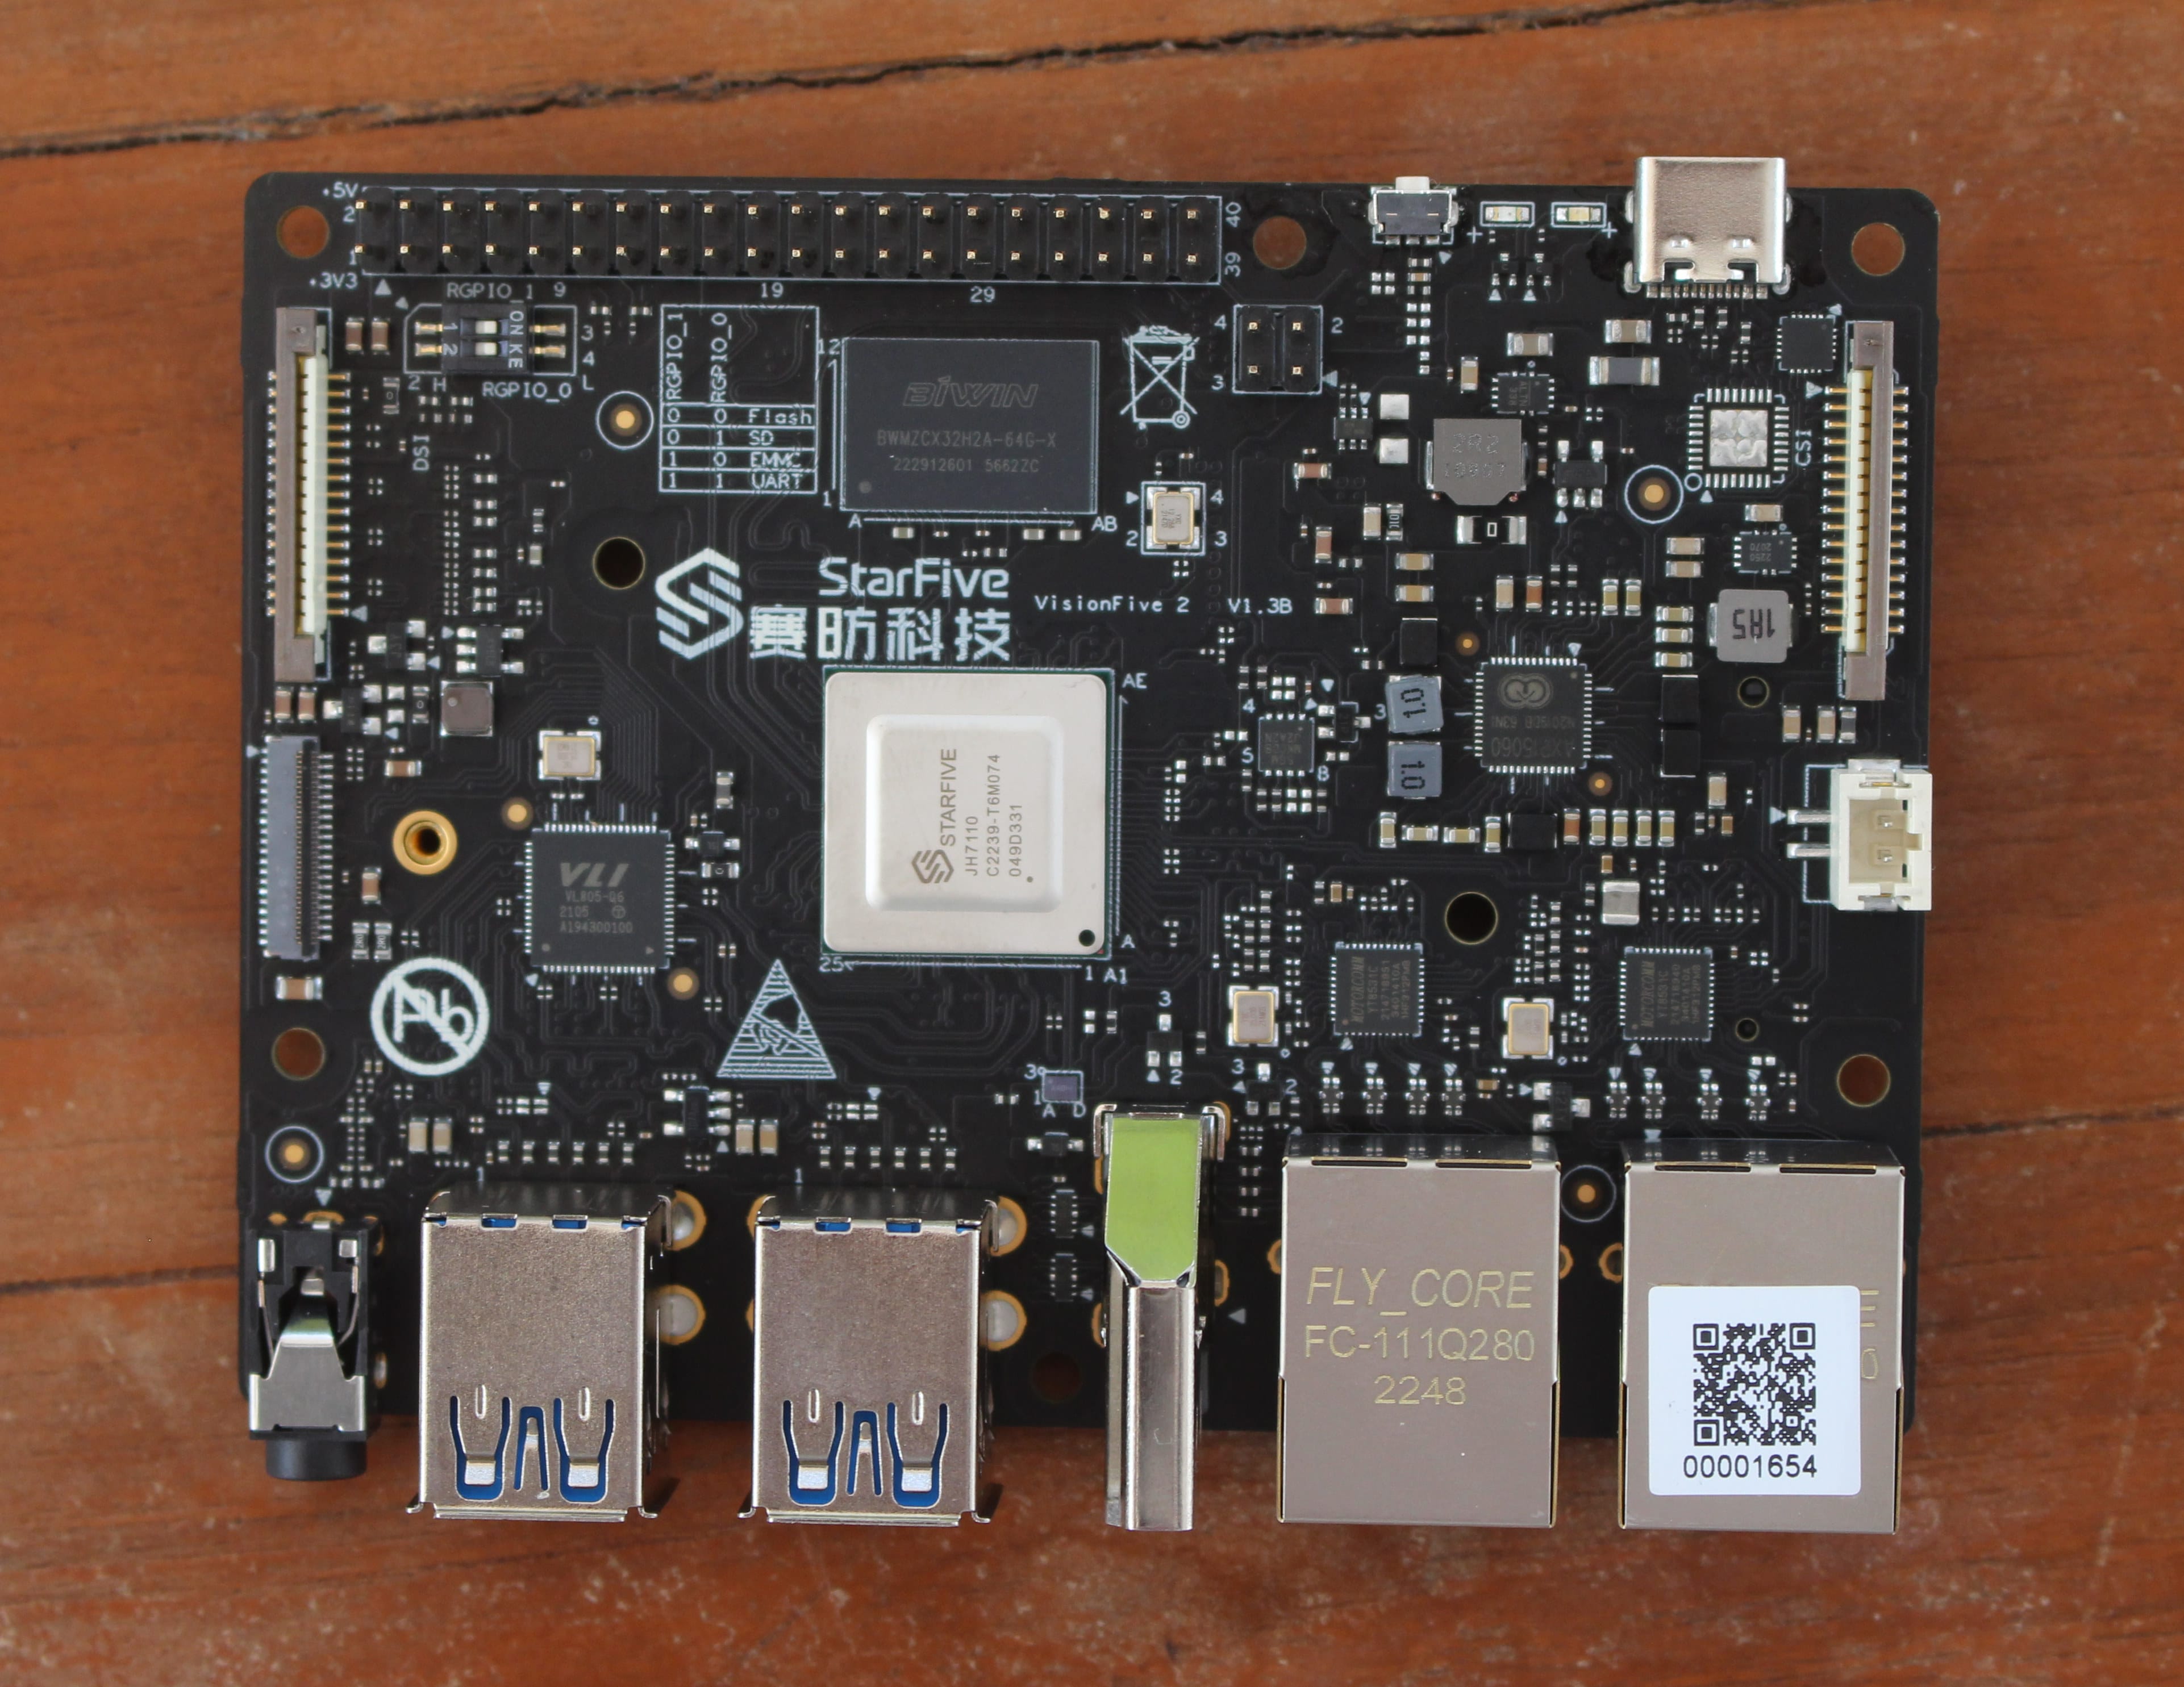 Hands-on Experience With StarFive VisionFive RISC-V SBC, 43% OFF